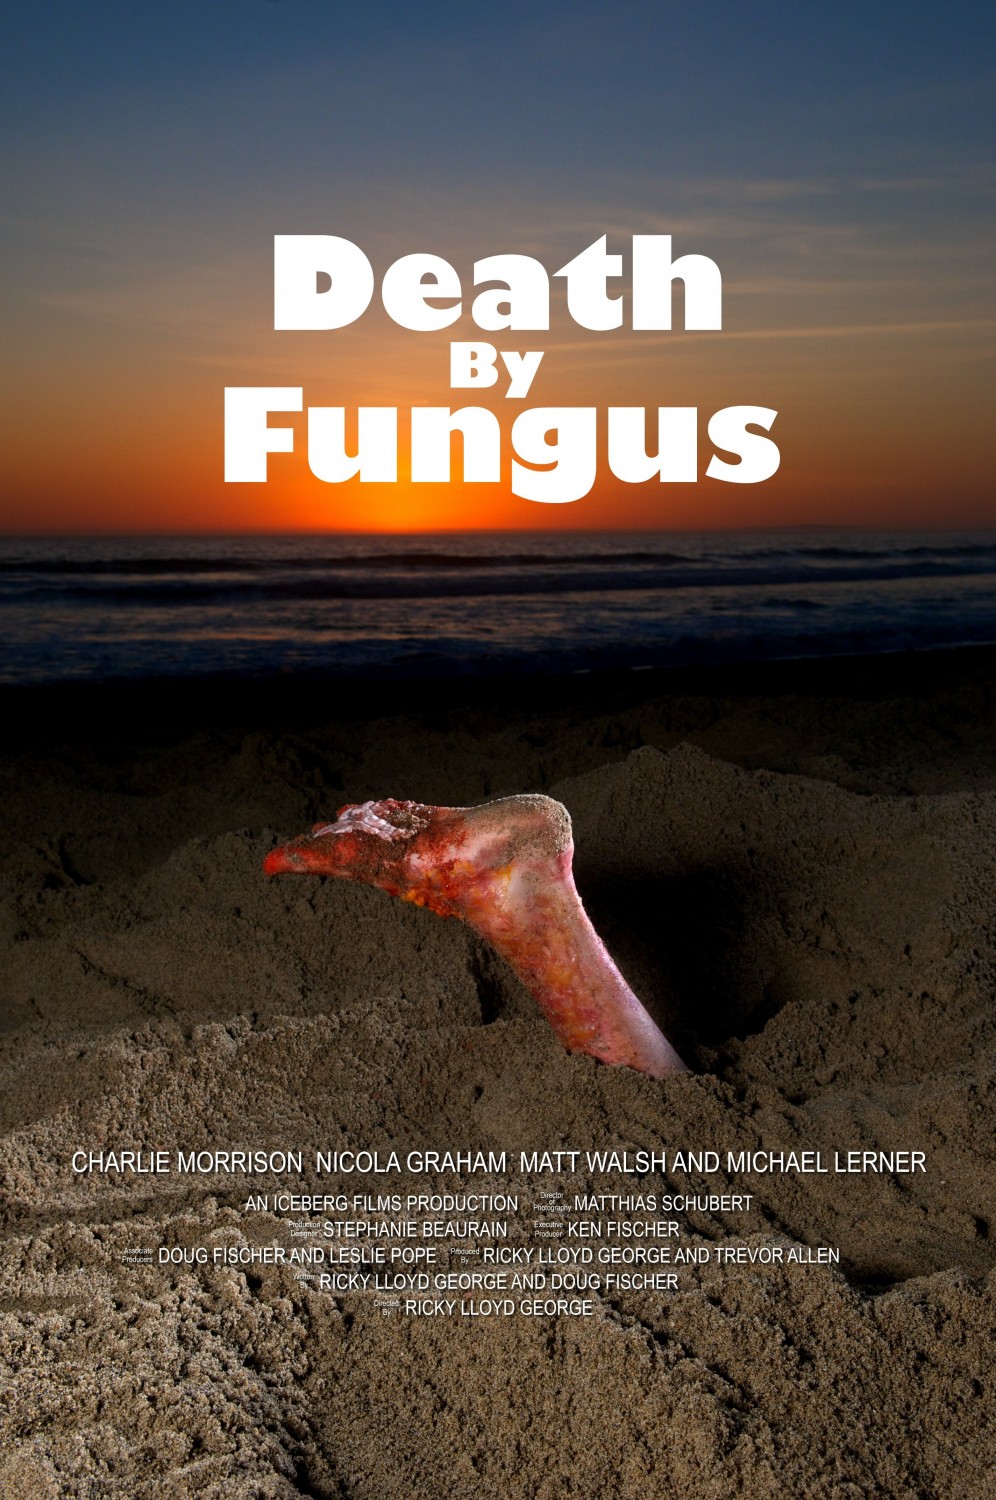 Extra Large Movie Poster Image for Death by Fungus